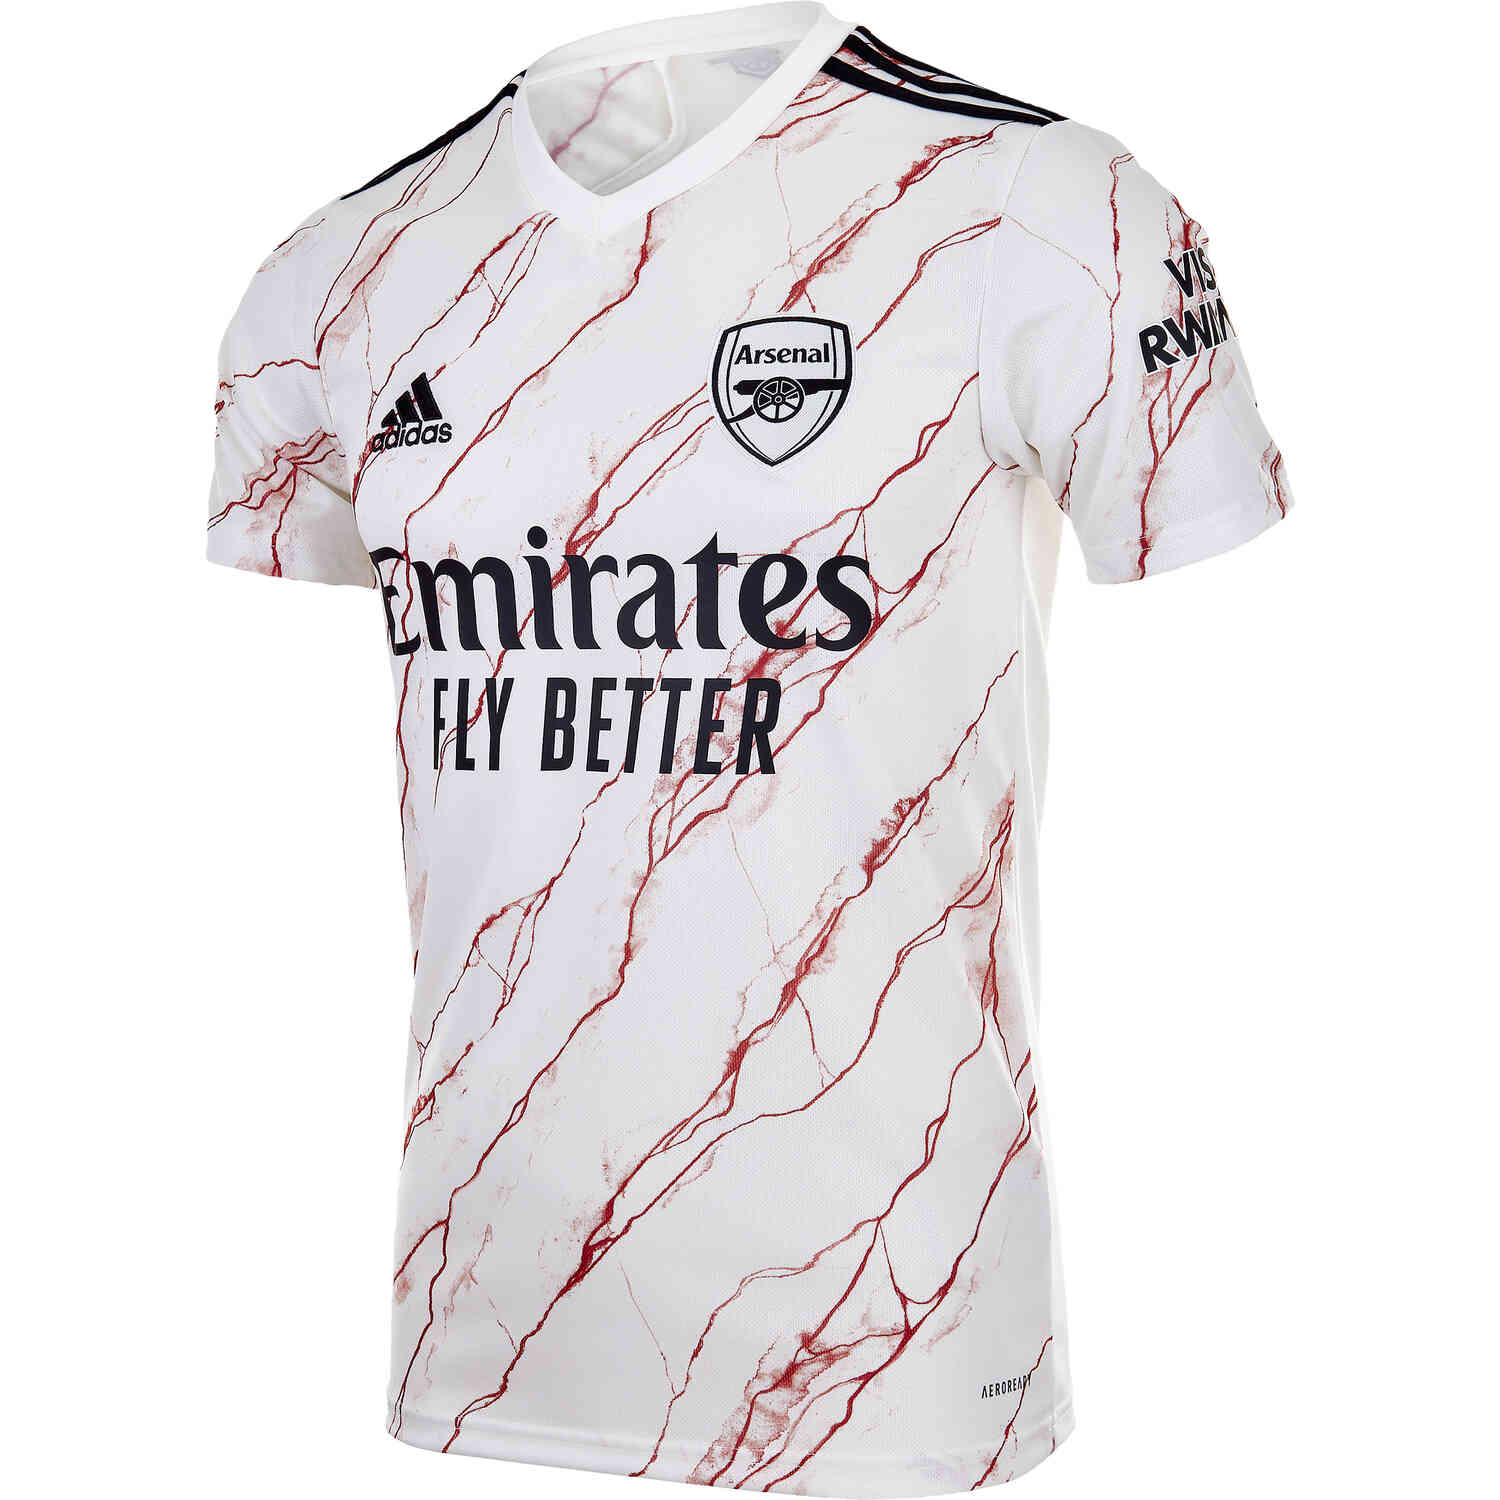 Arsenal Away Jersey 2020/21 : Arsenal S 2020 21 Kit New Home And Away